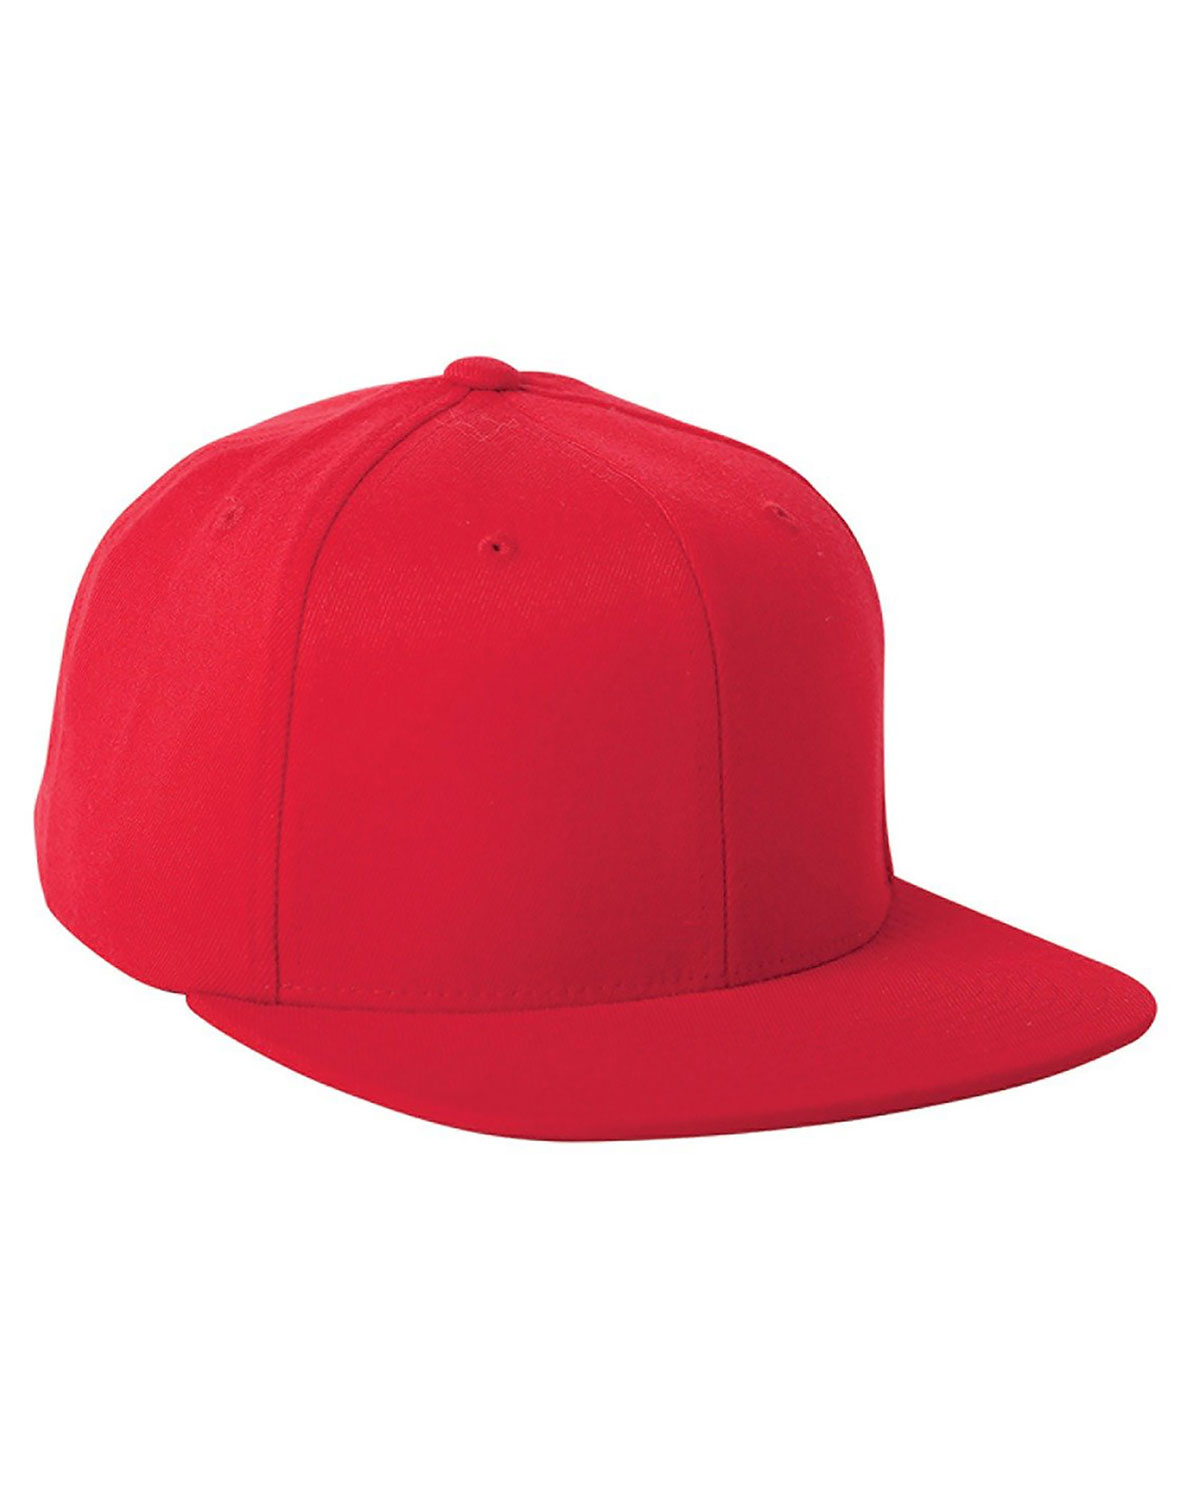 Yupoong 110F Men Fitted Classic Shape Cap at Apparelstation